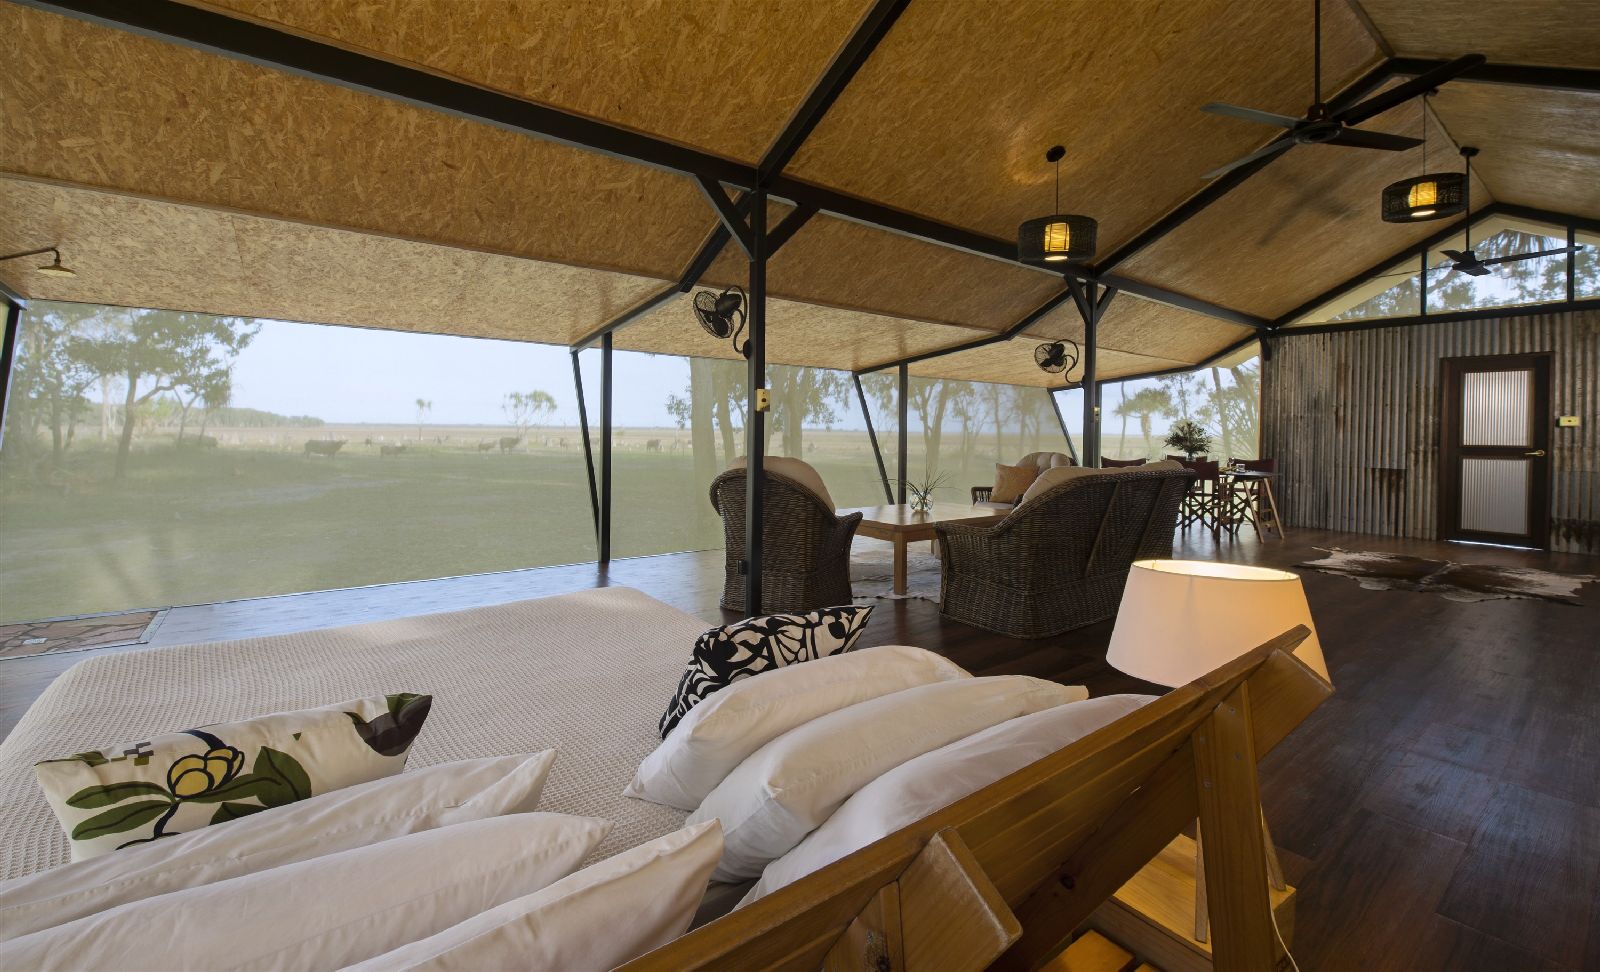 A Kingfisher Suite at Bamurru Plains in Northern Australia